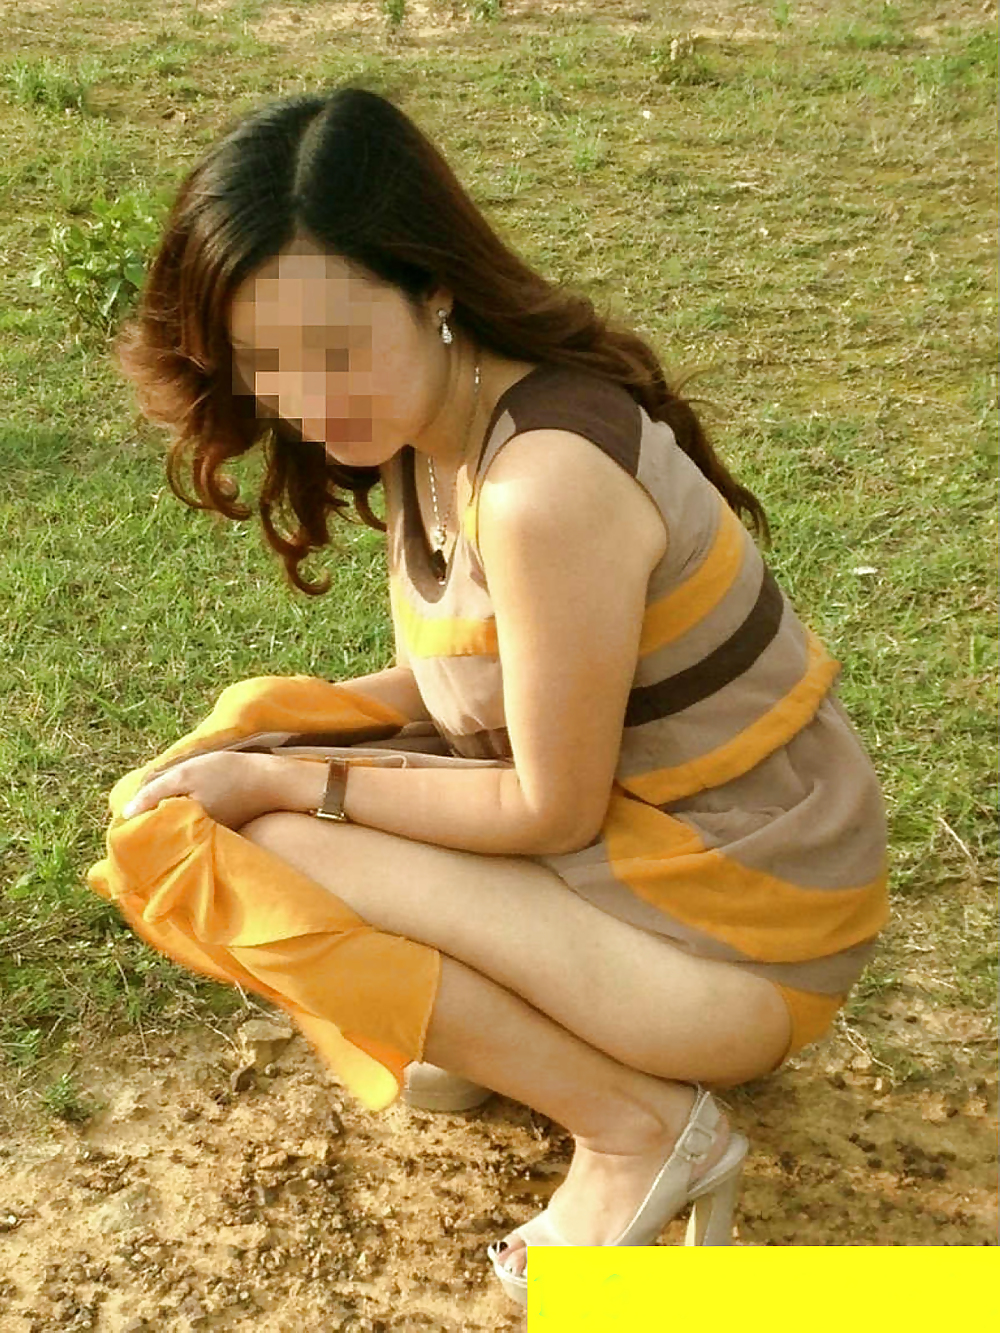 Friend's chinese wife flashing in public #14820529